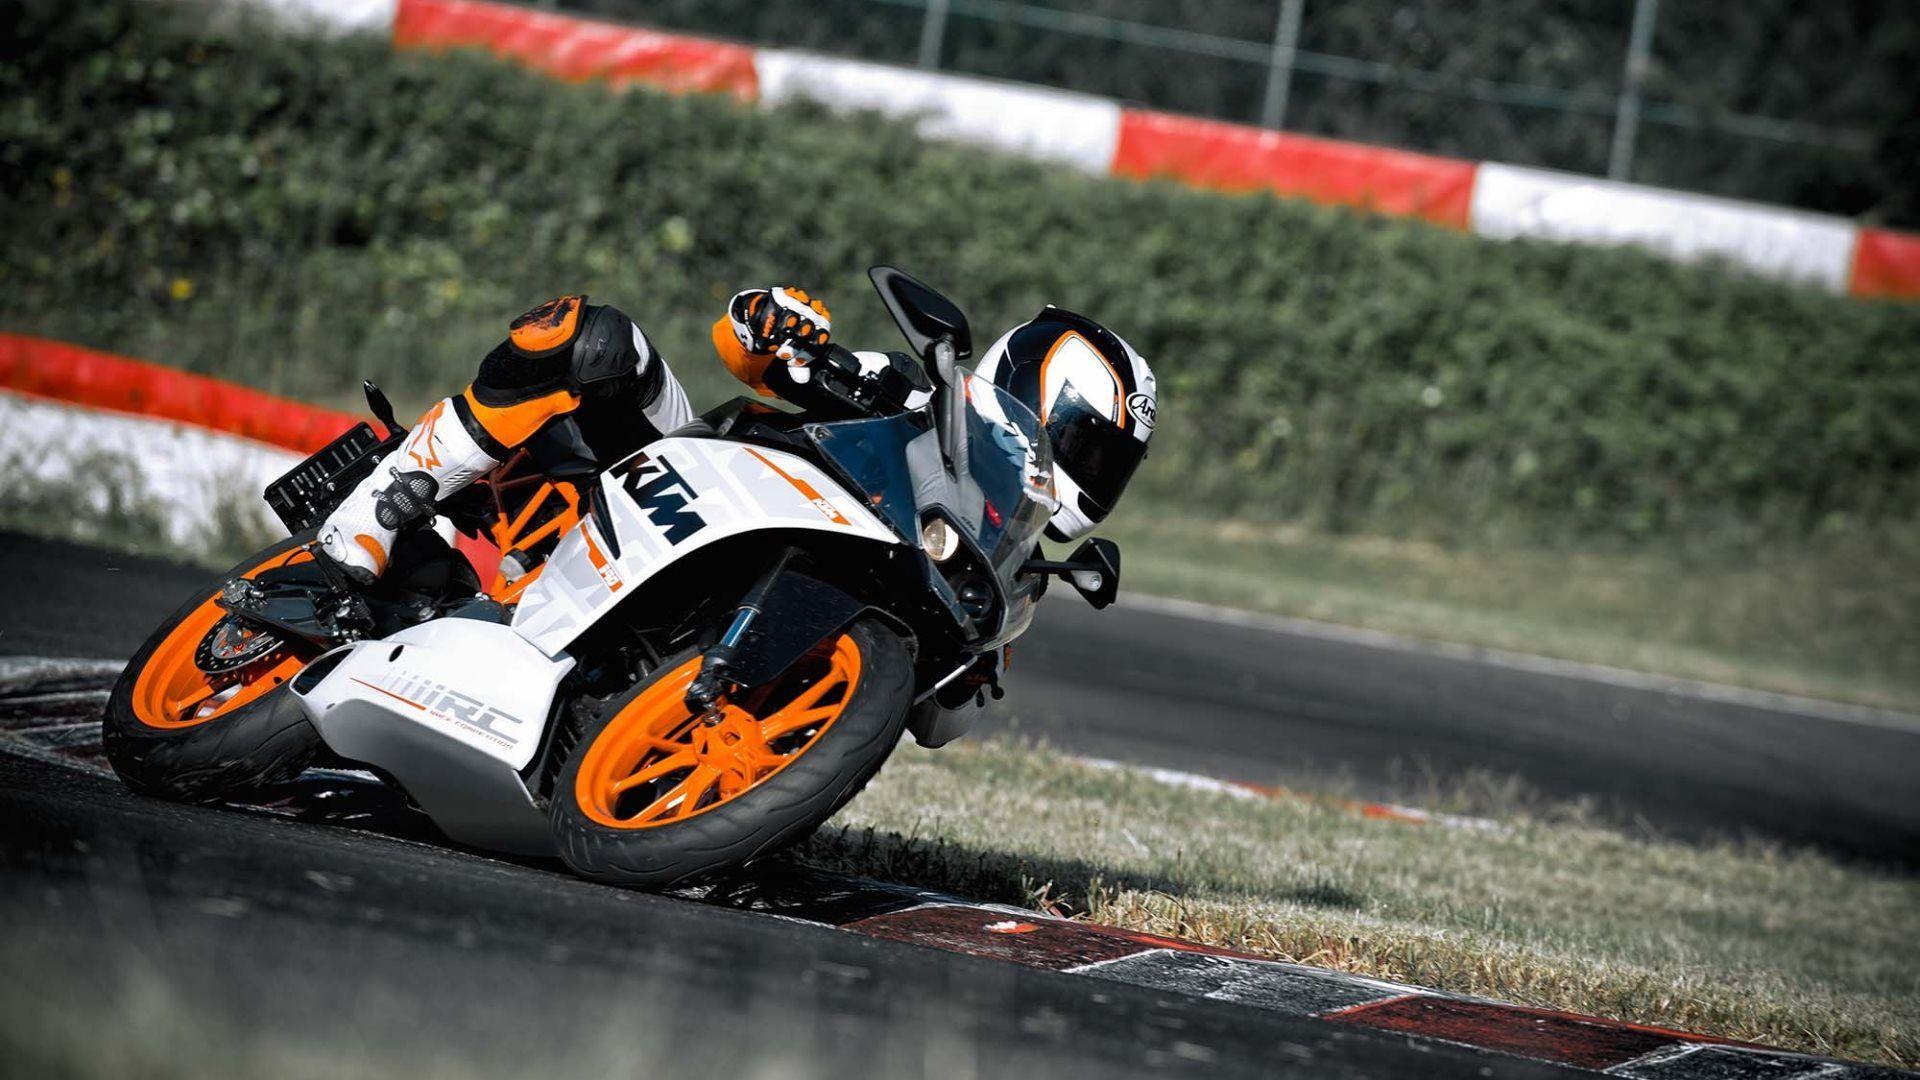 KTM RC390 Sports bike is here with new Specifications